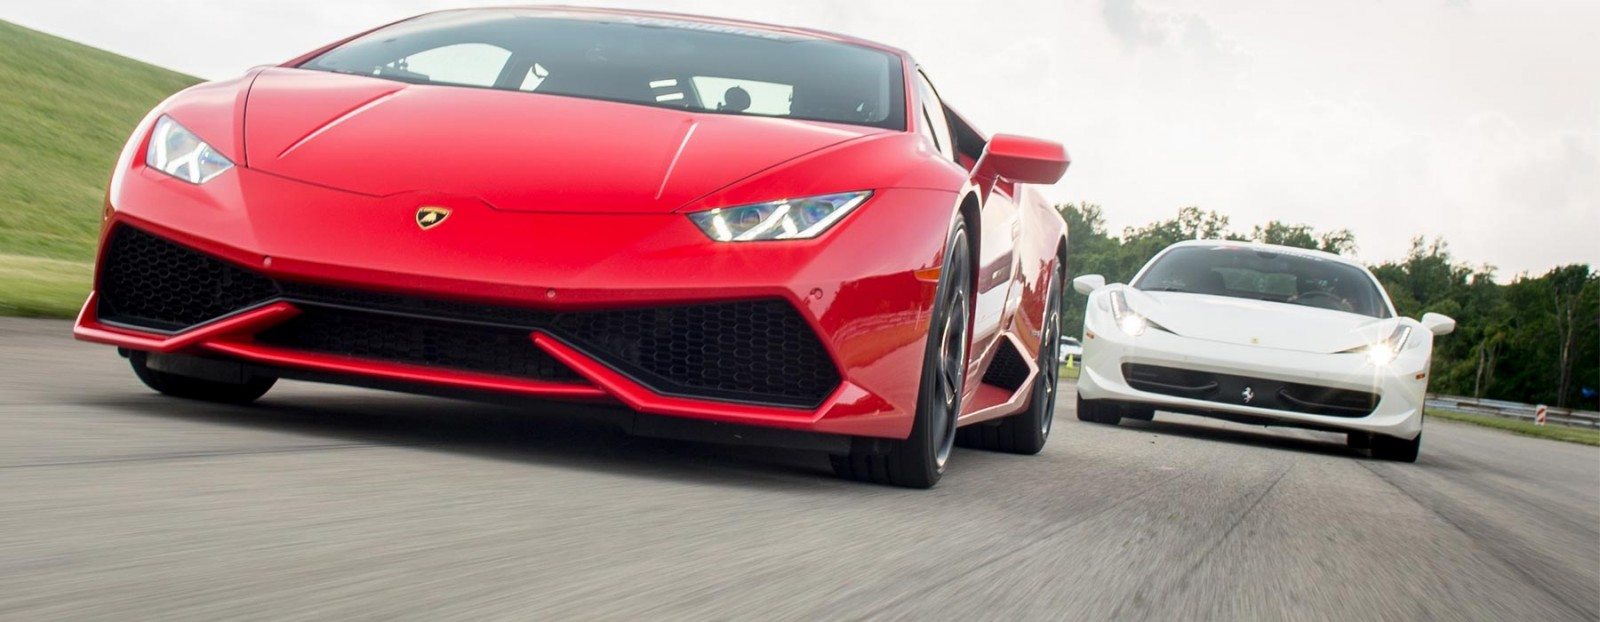 Drive exotic cars on a racetrack with Xtreme Xperience